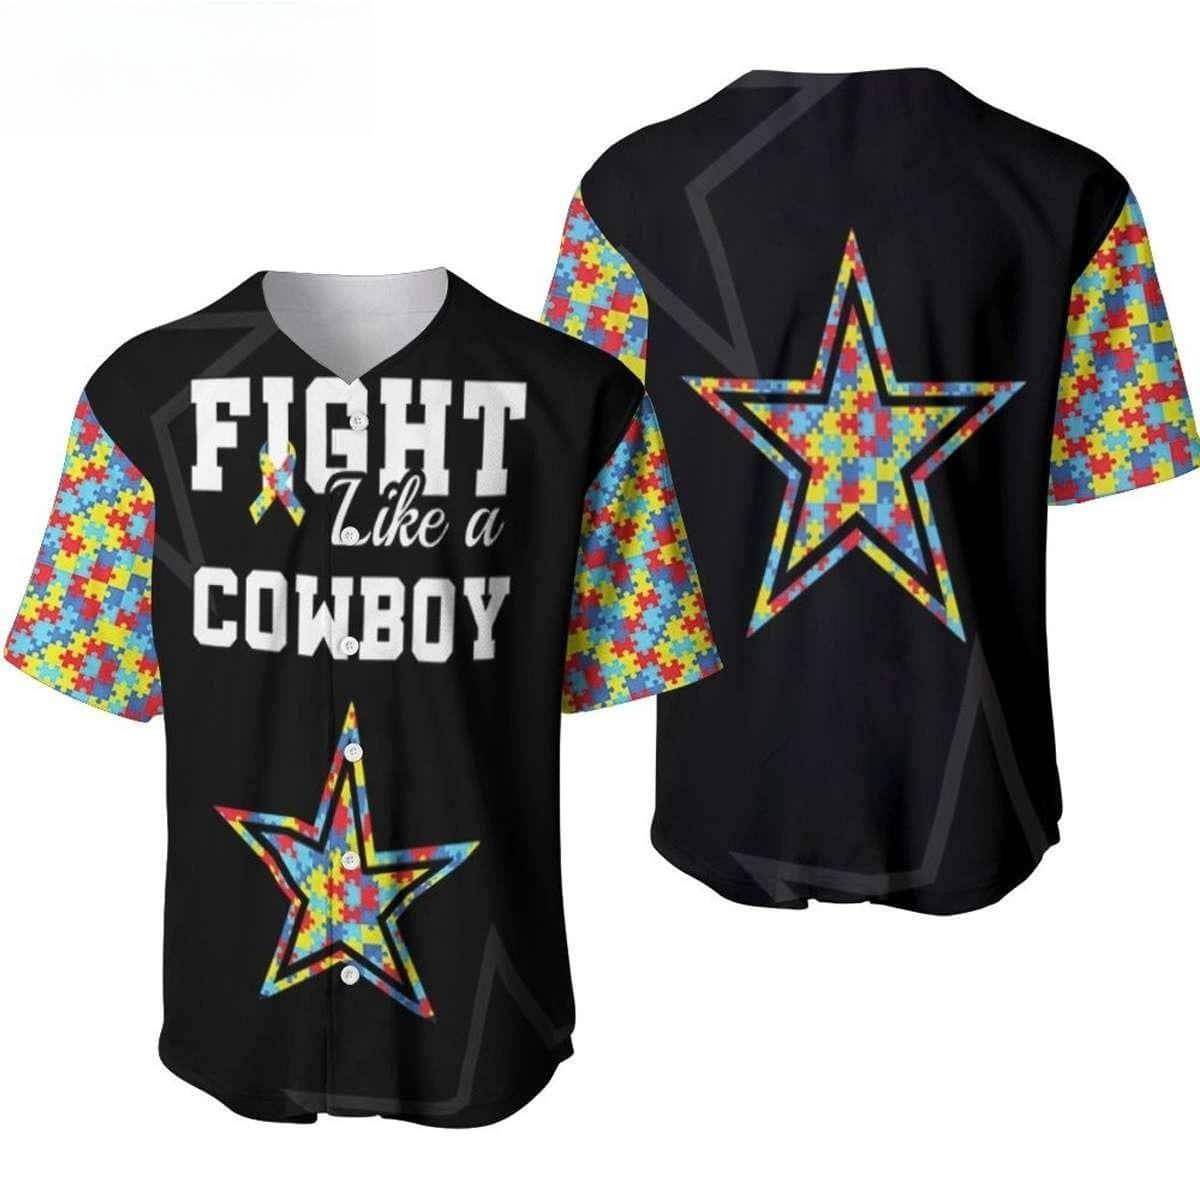 Fight Like A Dallas Cowboys Baseball Jersey Autism Support